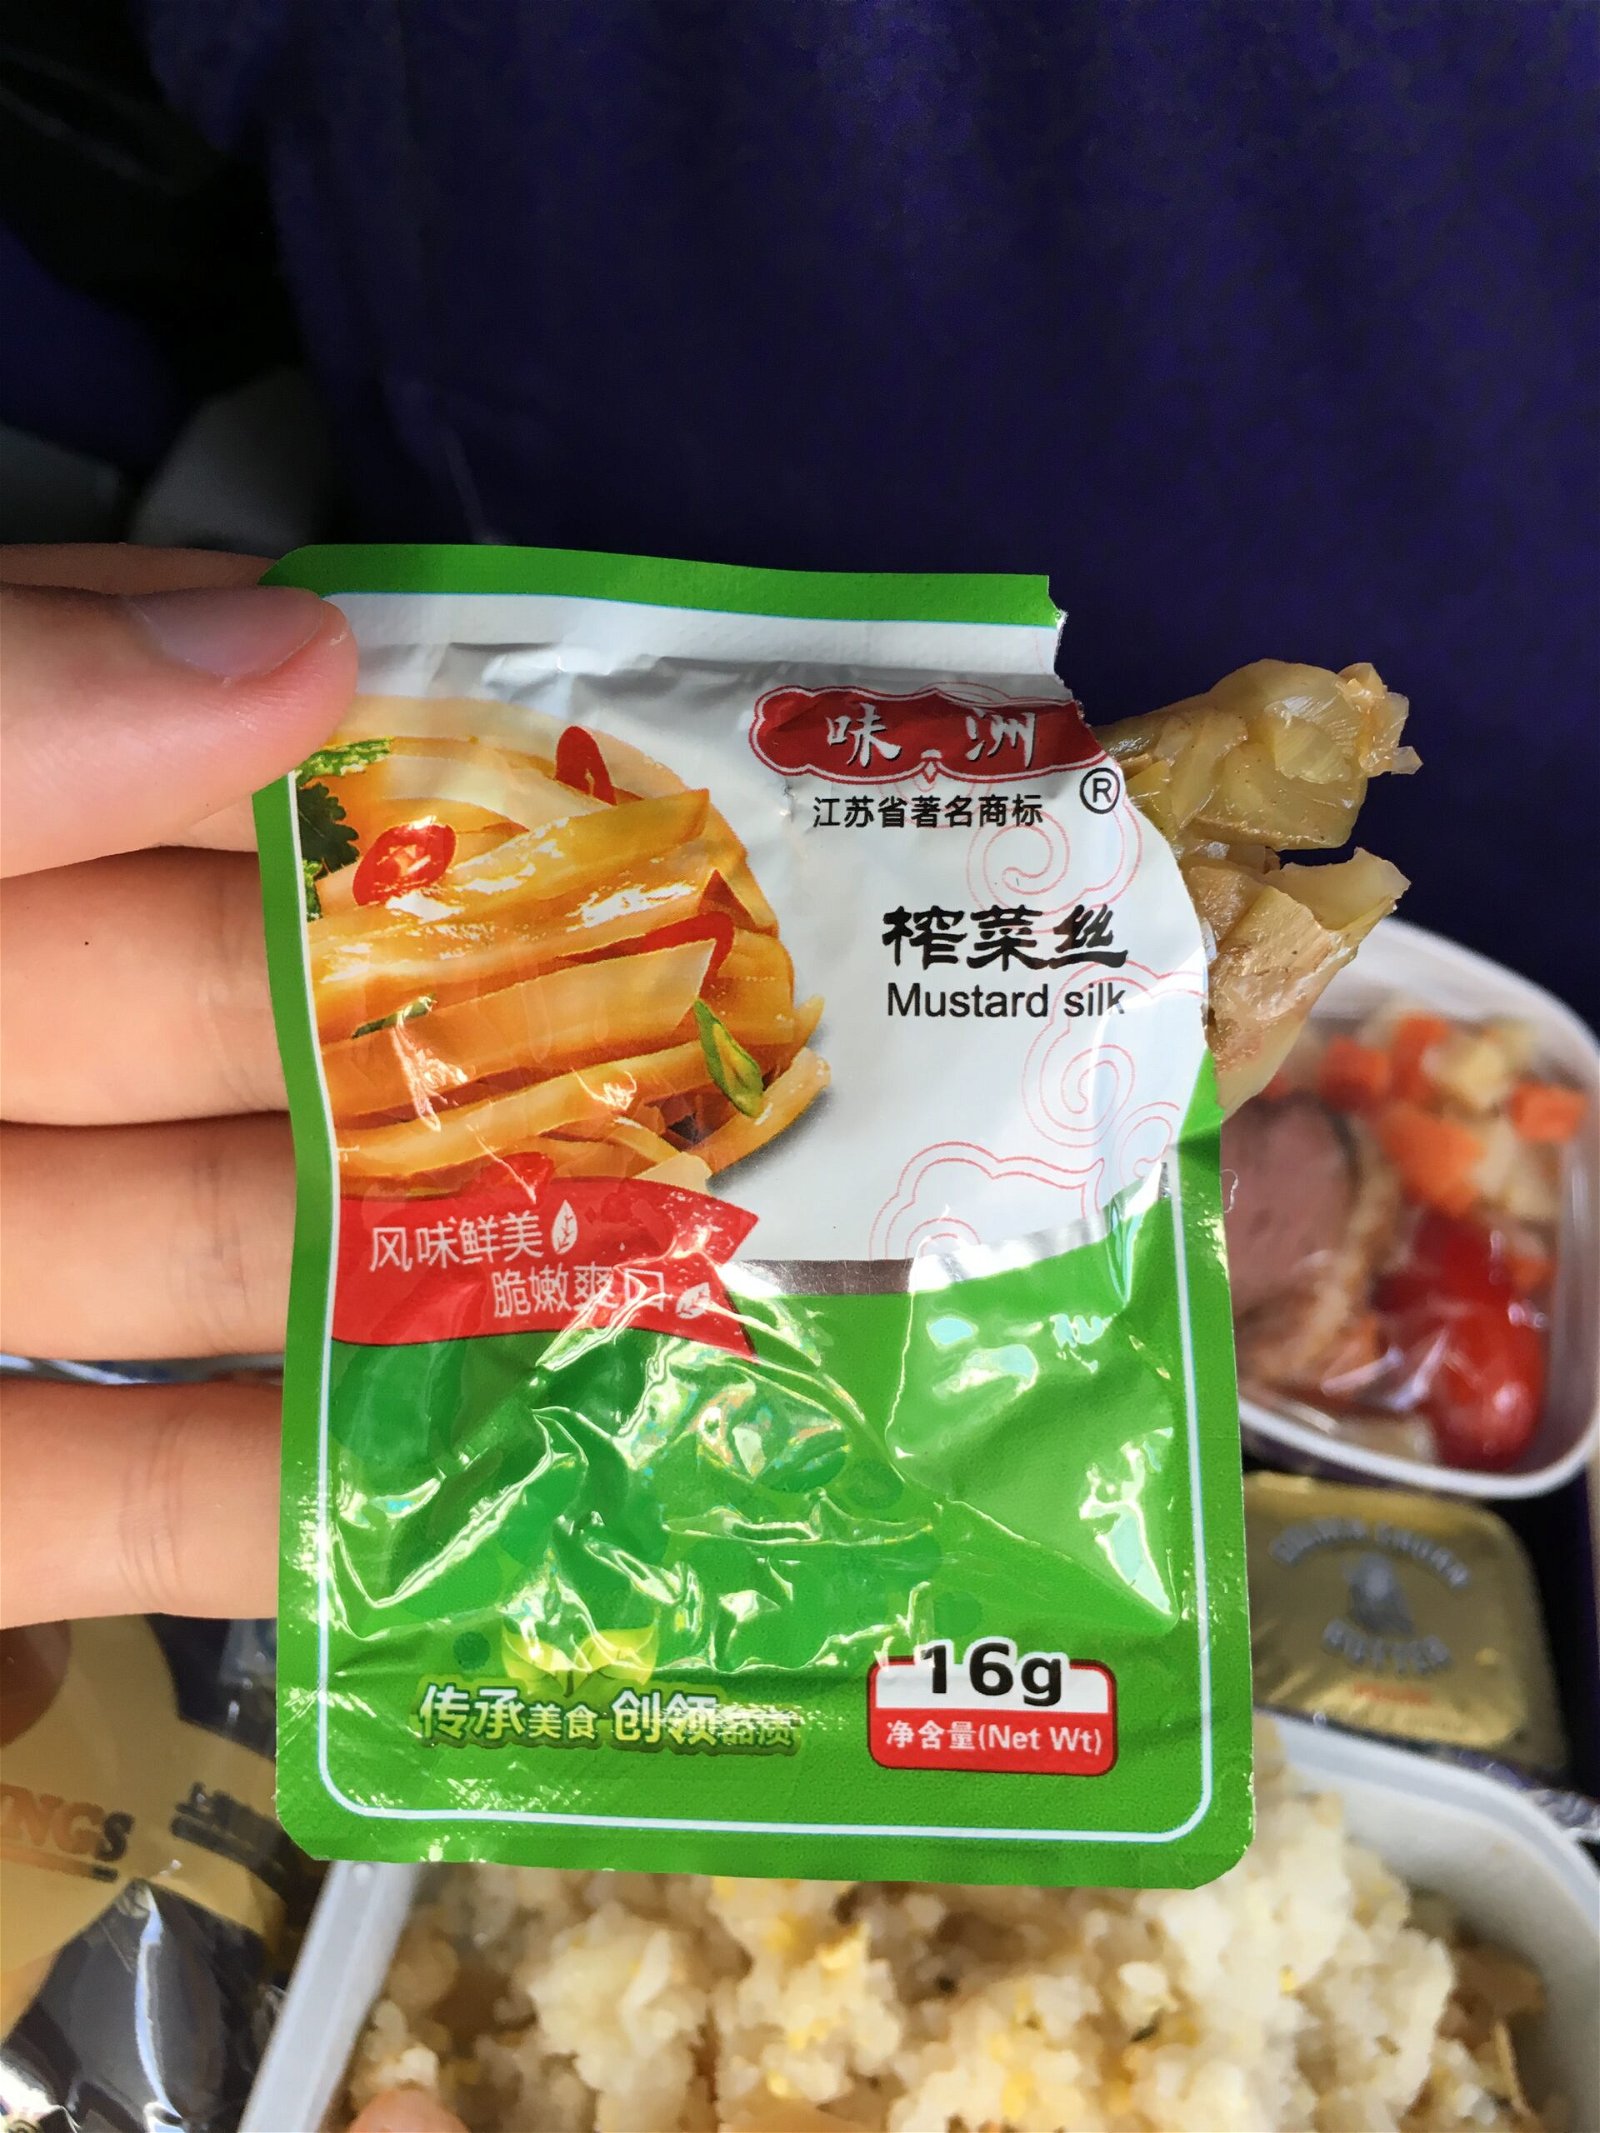 Shanghai Airlines meal 5